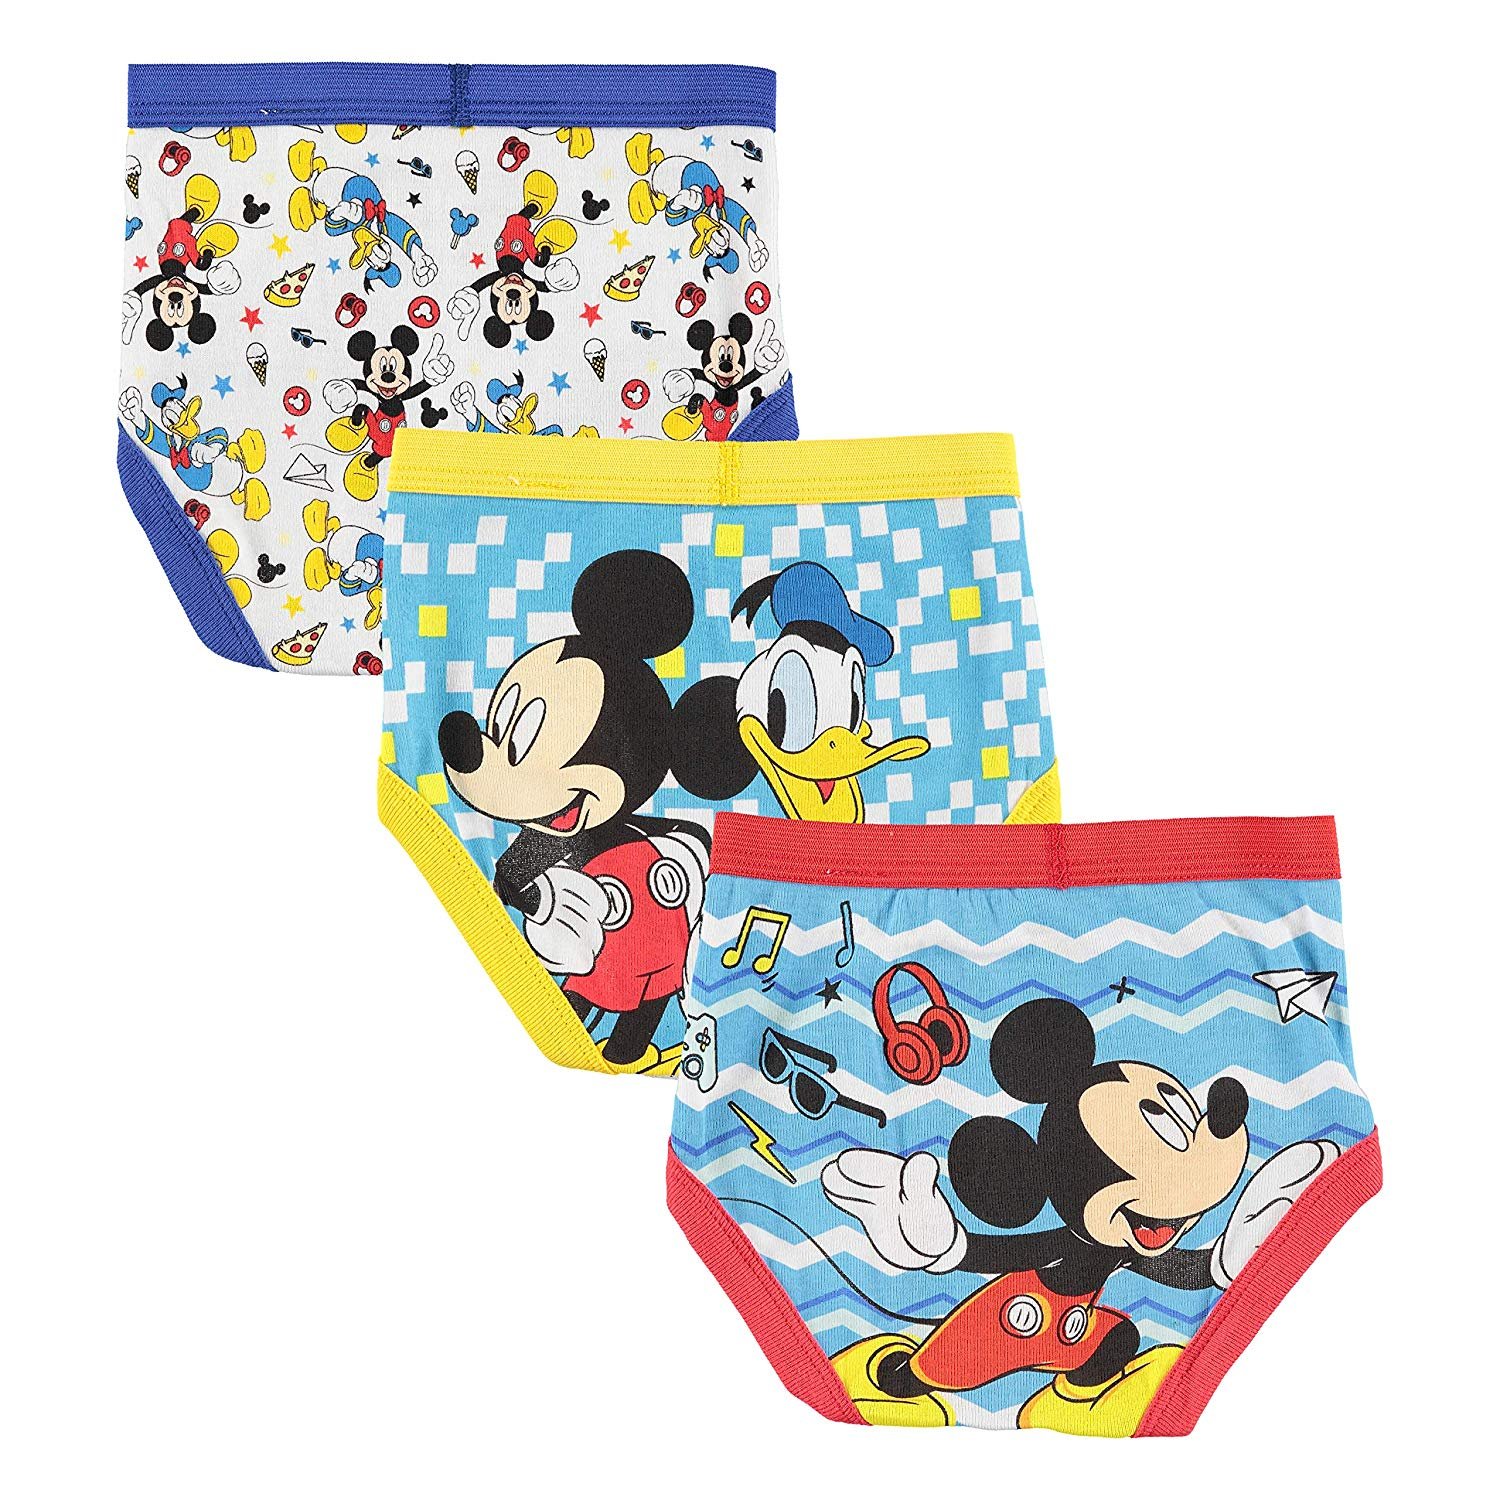 FAGOTTINO Baby Boy's White/Yellow Five-pack cotton briefs with Mickey Mouse  print